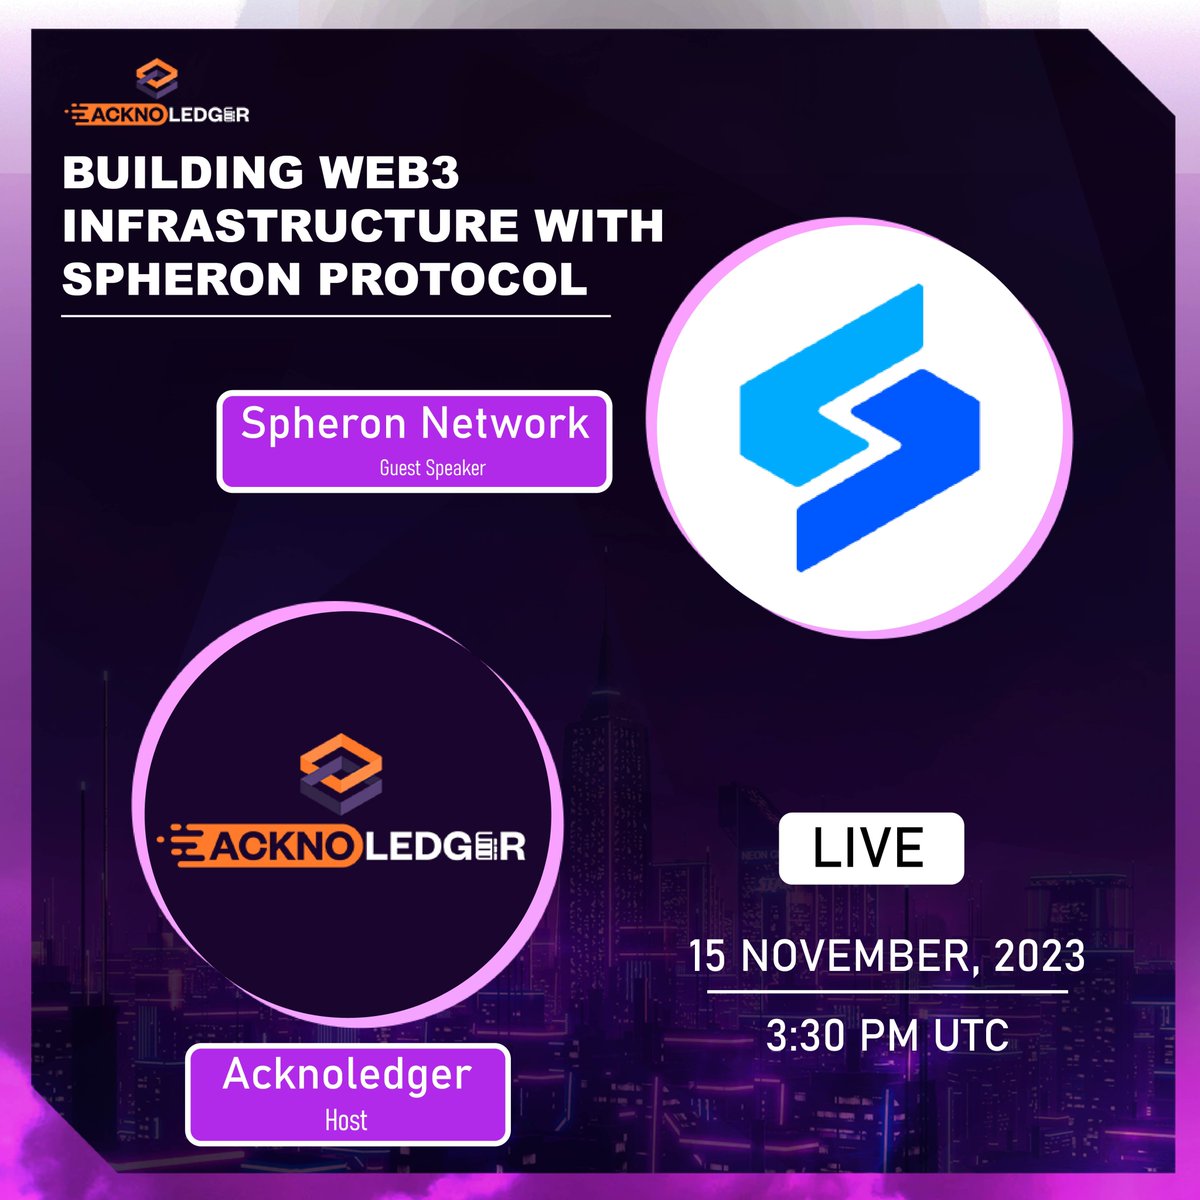 🚀 Join us TODAY at 3:30 PM UTC for an exclusive session hosted by Acknoledger, diving into the future of Web3 Infrastructure with the innovative @SpheronFDN! Discover the building blocks of tomorrow's tech at Spheron Network. @ydcurious @rbkasr @Kuntalico Don't miss this…